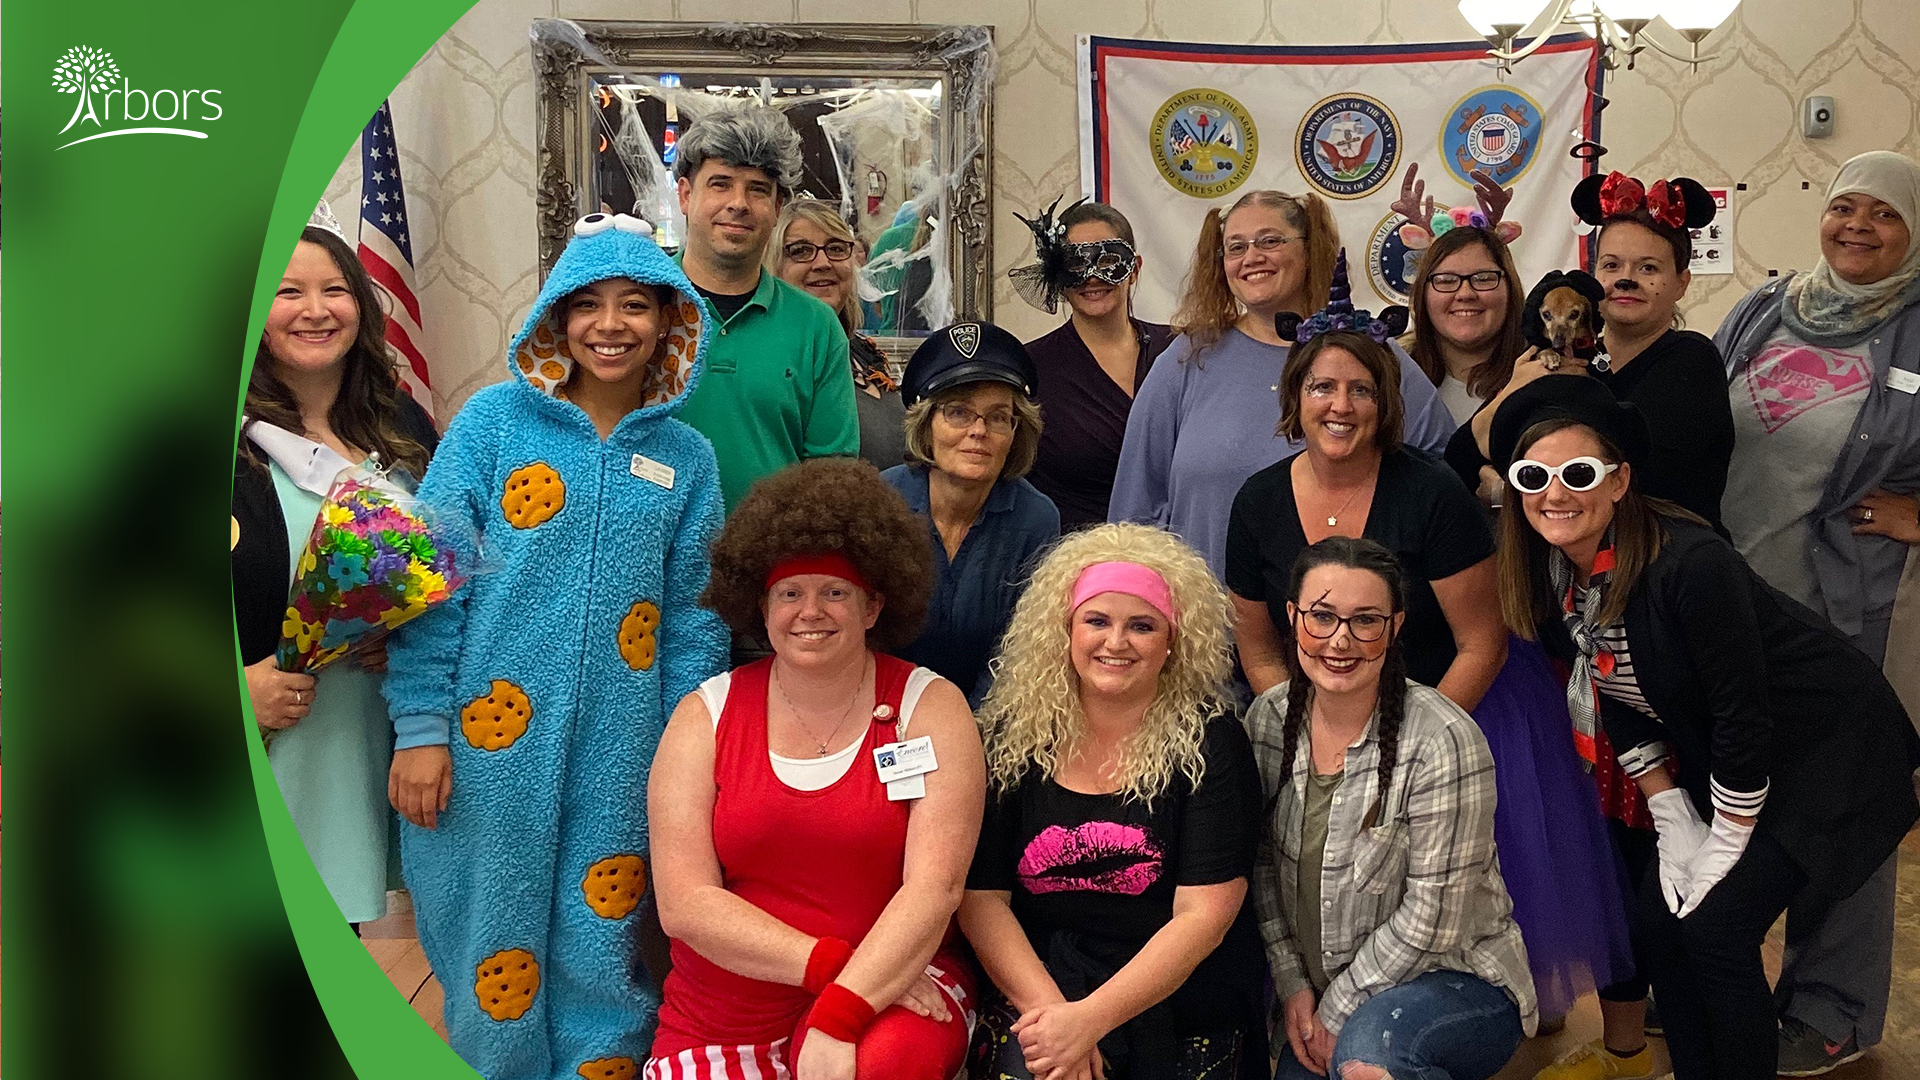 staff dressed up for trick or treat night